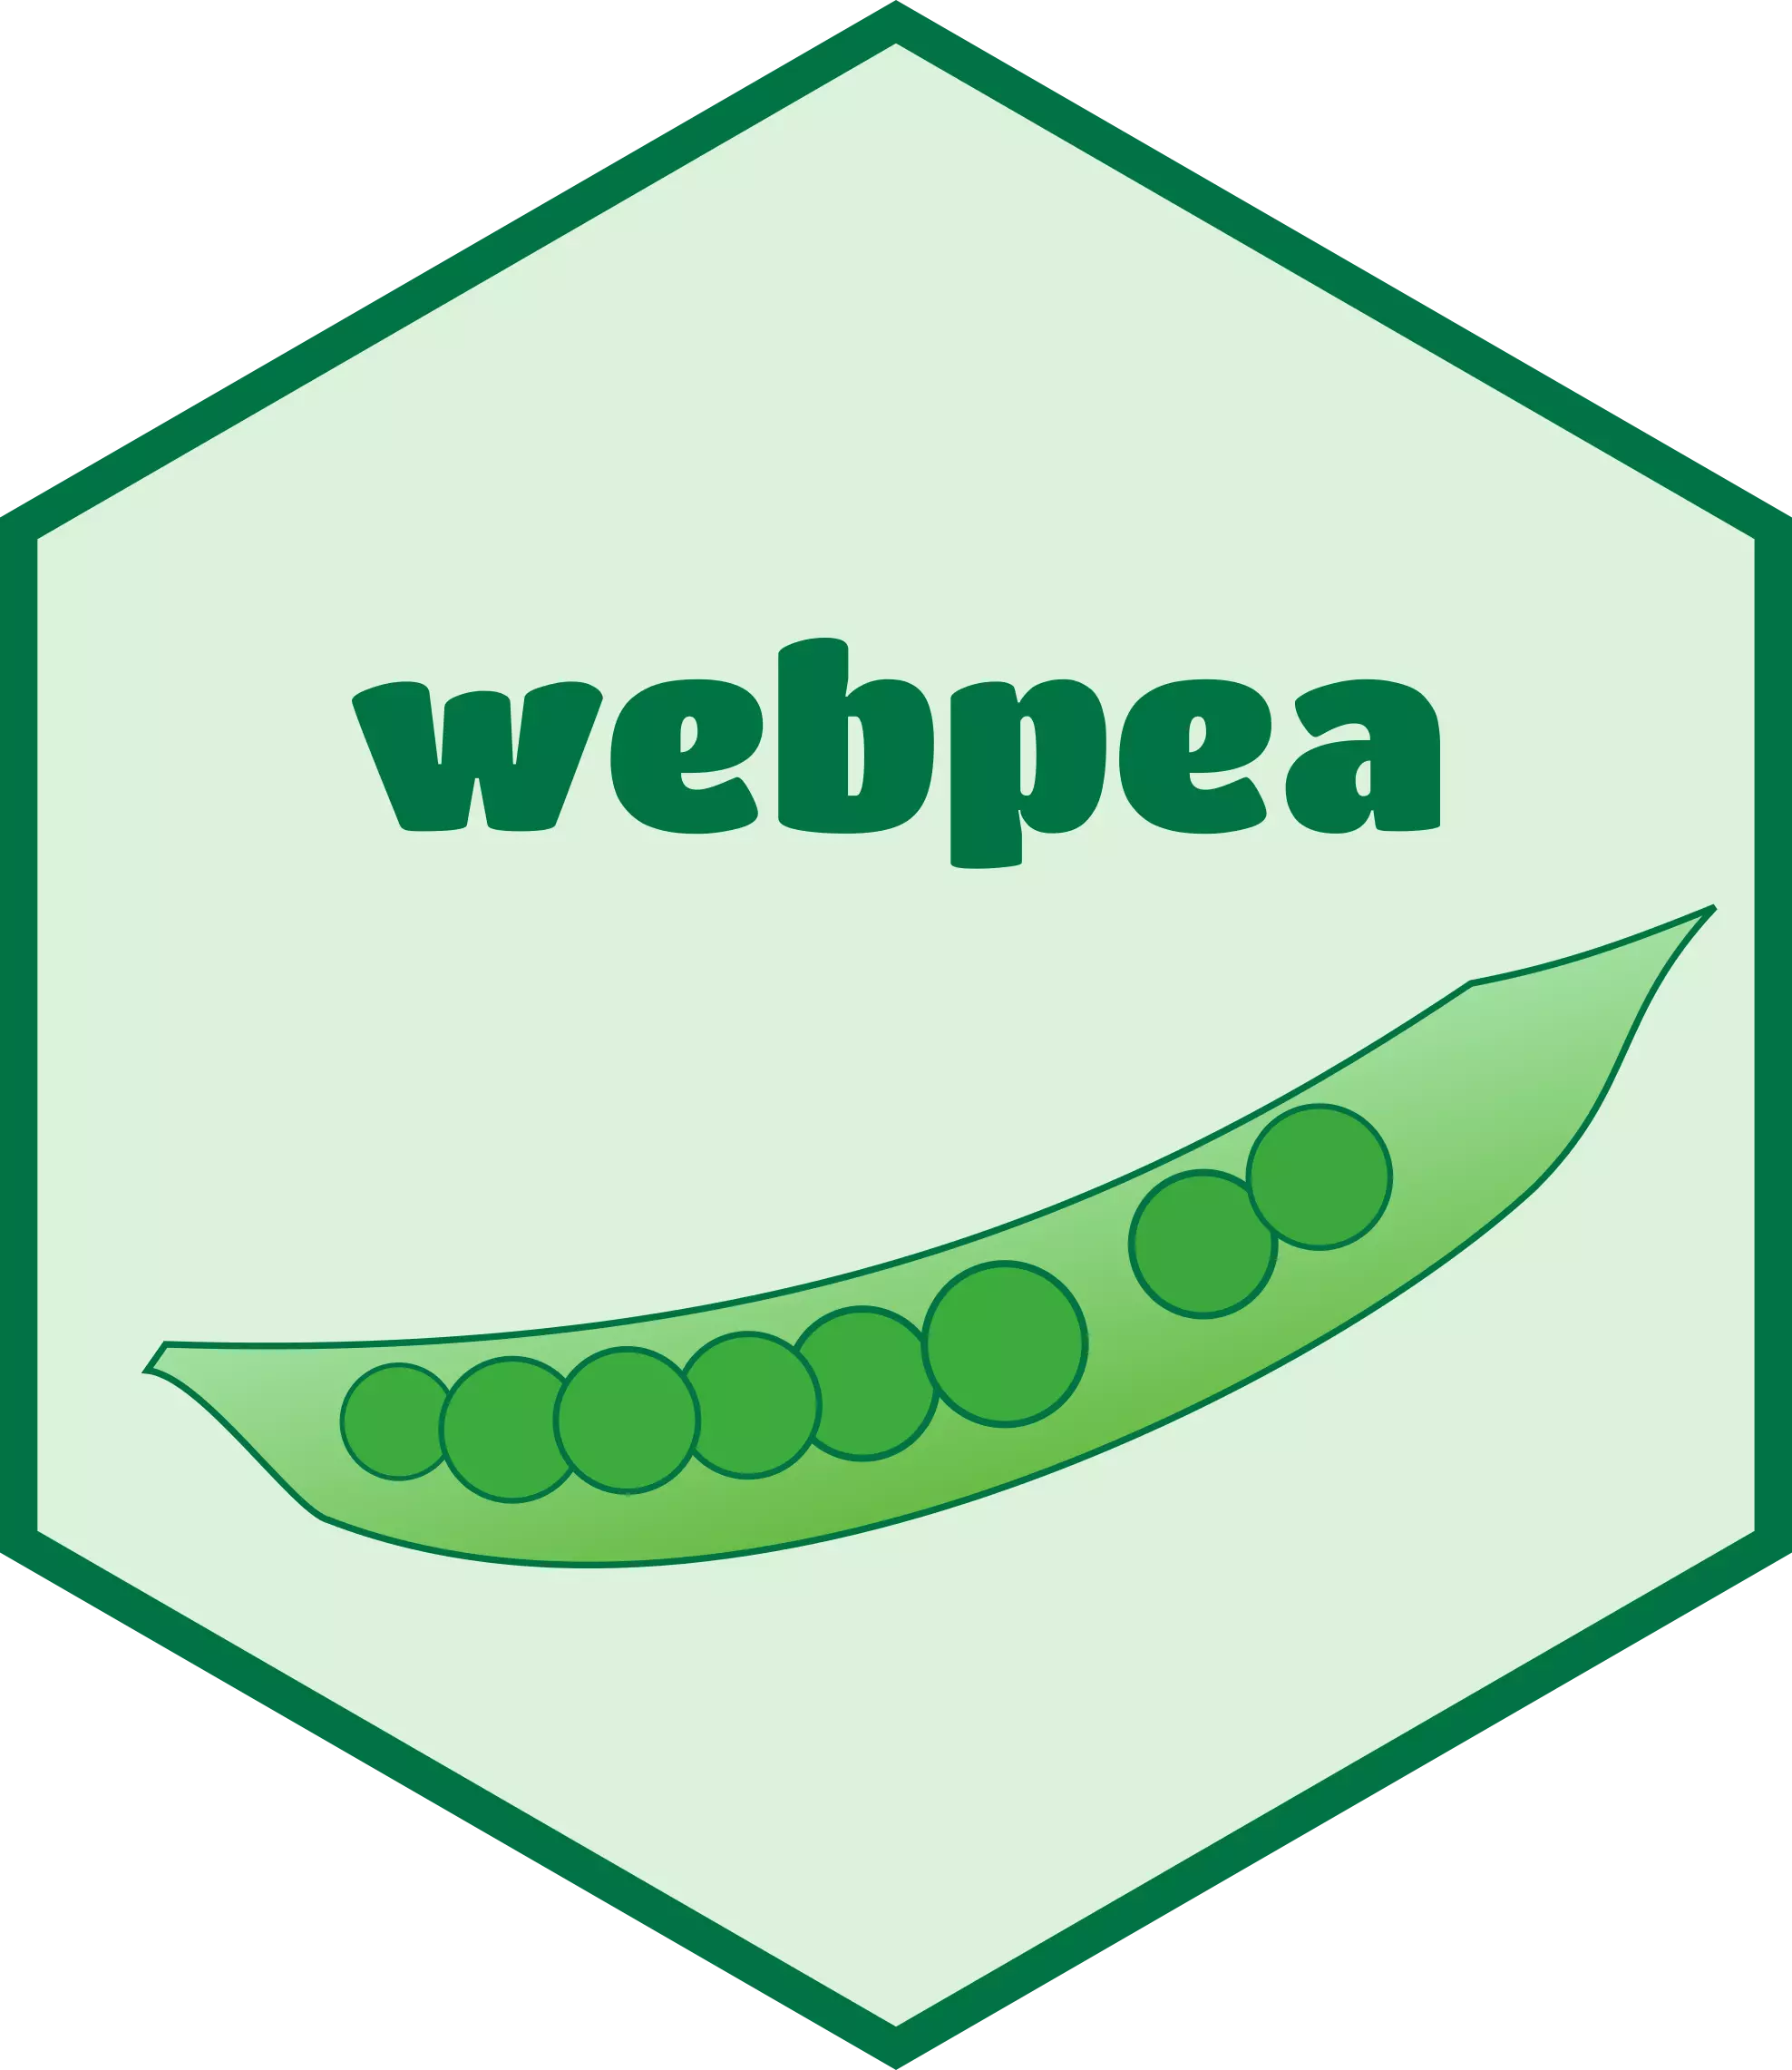 The hex sticker of the webpea package.